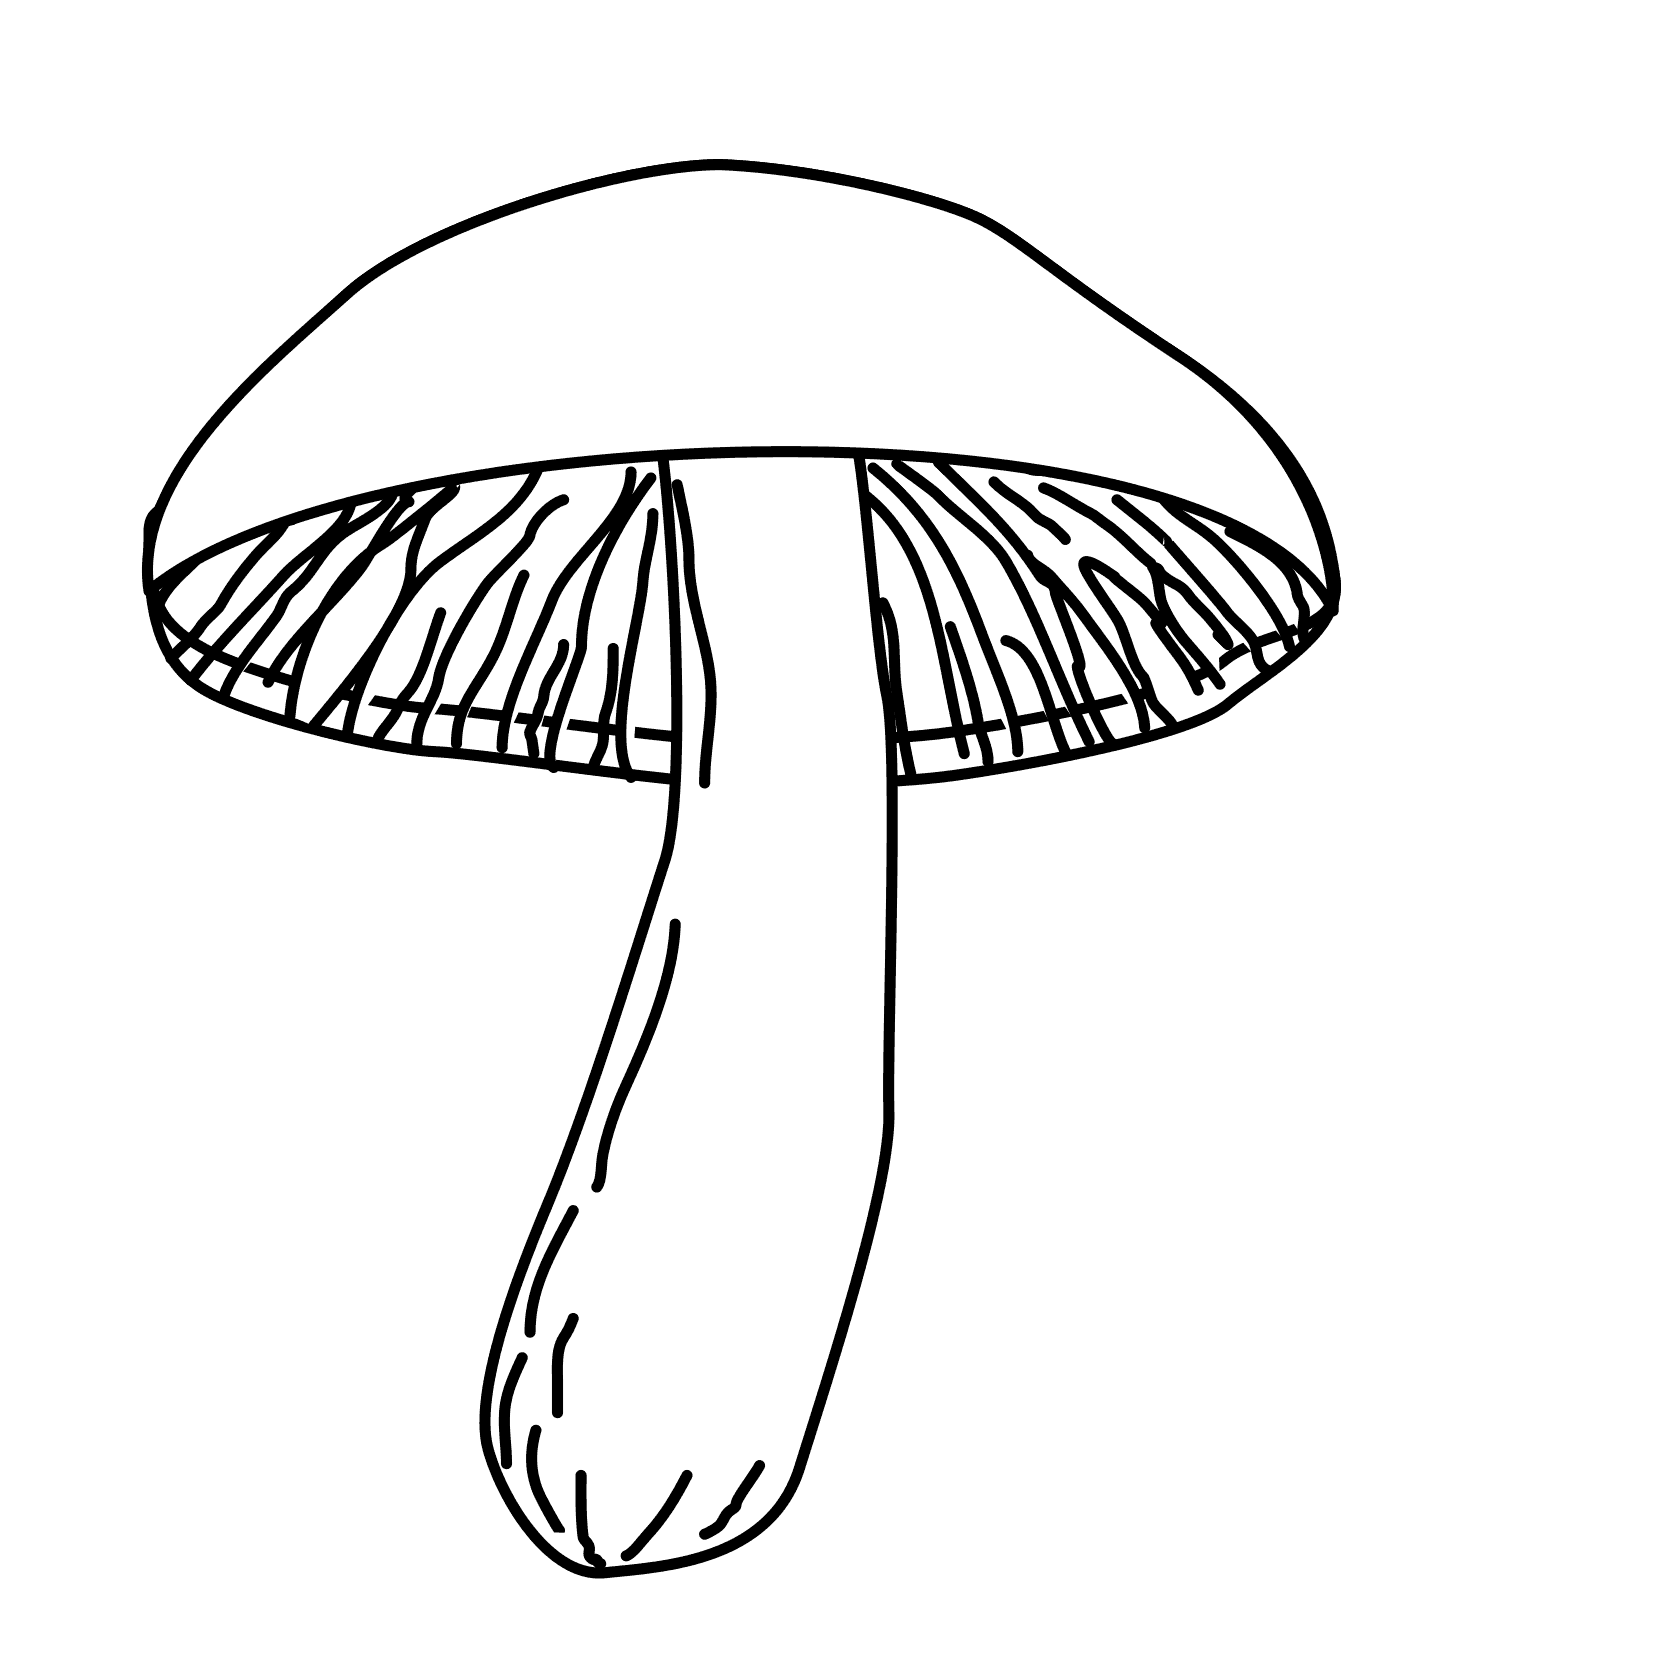 Coloring Pages Plants And Fungi   Free Downloads